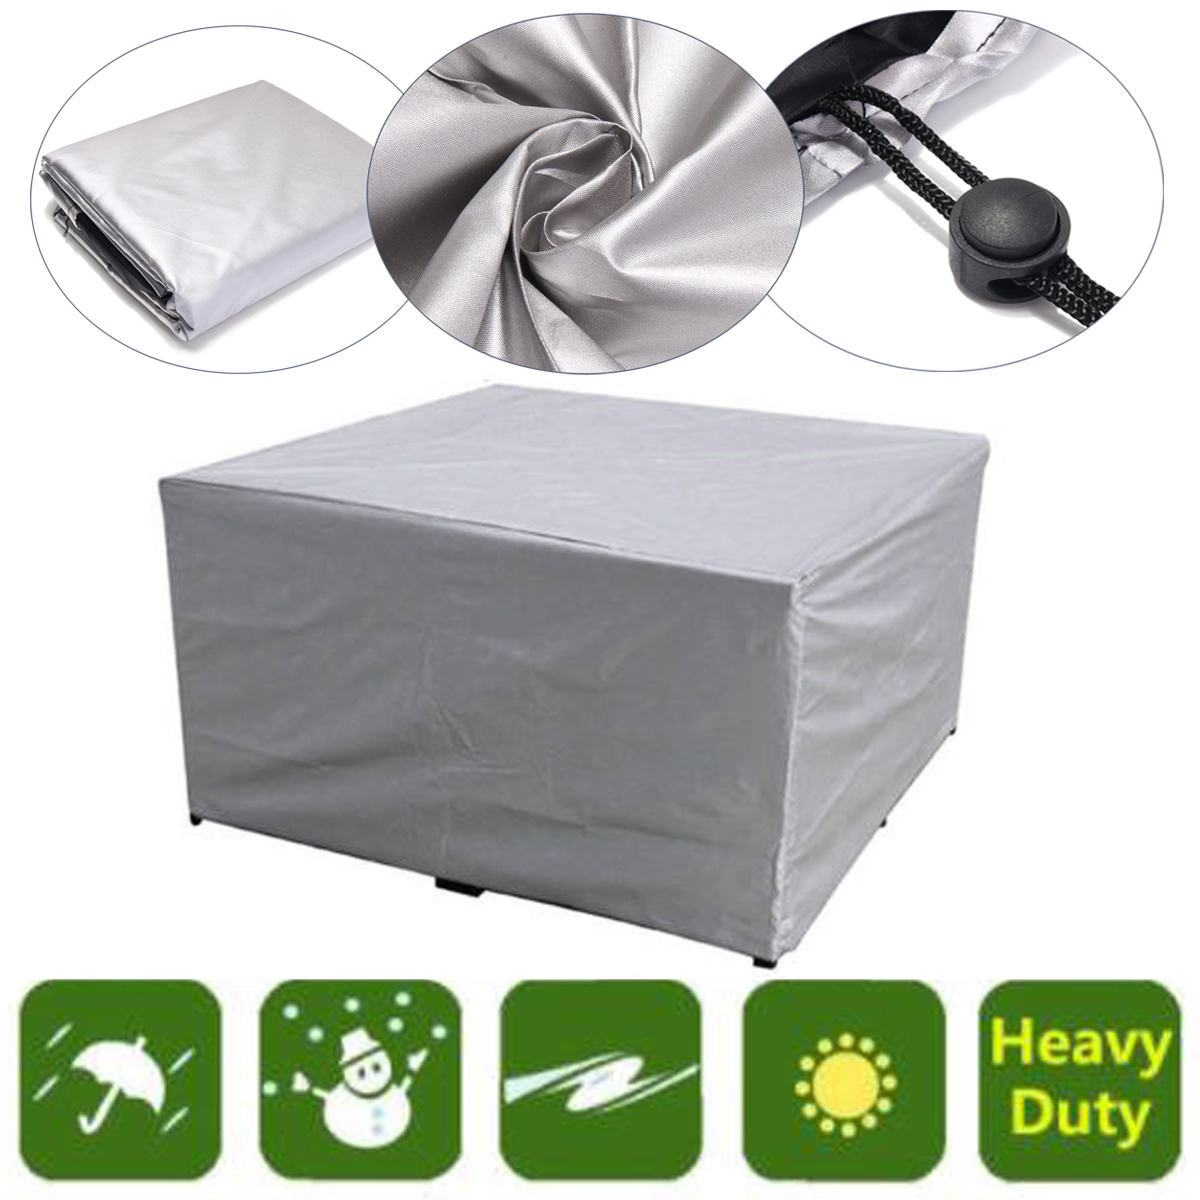 Large-Capacity-Waterproof-Furniture-Table-Sofa-Chair-Cover-Garden-Outdoor-Patio-Protector-1558324-2